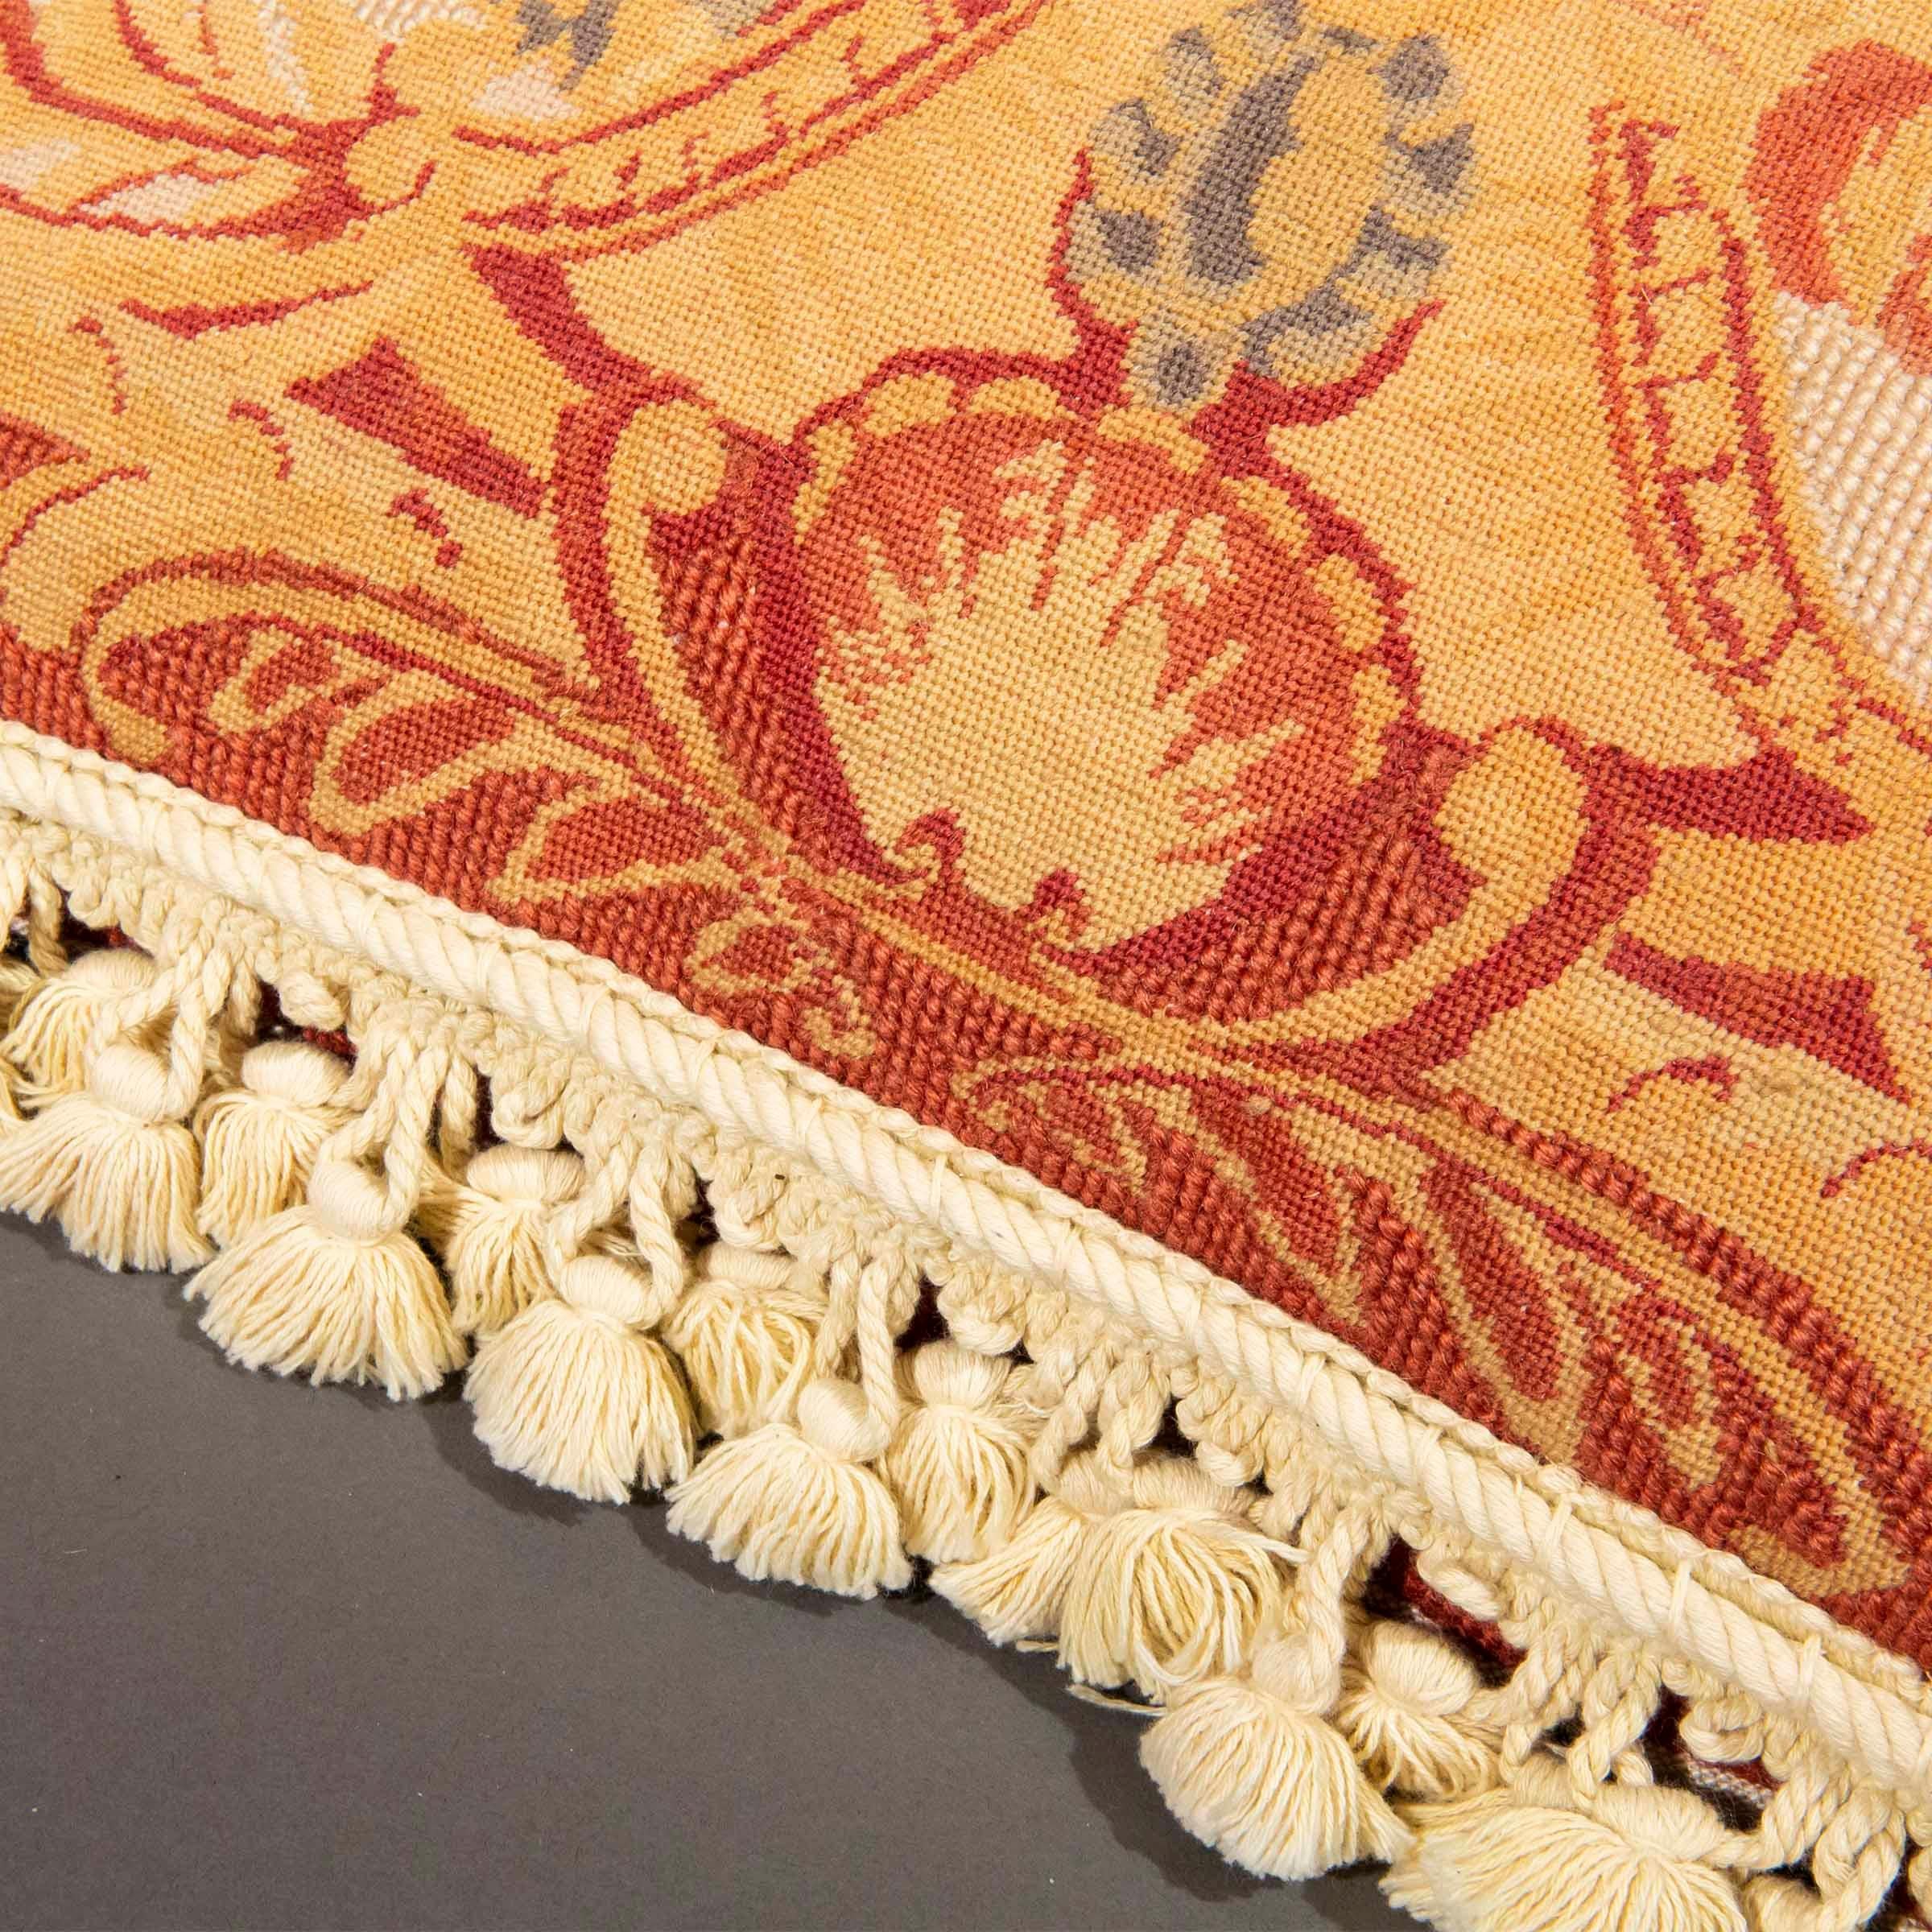 A pair of decorative loose cushions made of antique handwoven tapestry of floral design, with modern linen backing and tassel fringe edging.
French, late 19th – early 20th century.

Dimensions
19 by 19 in / 48 by 48 cm.